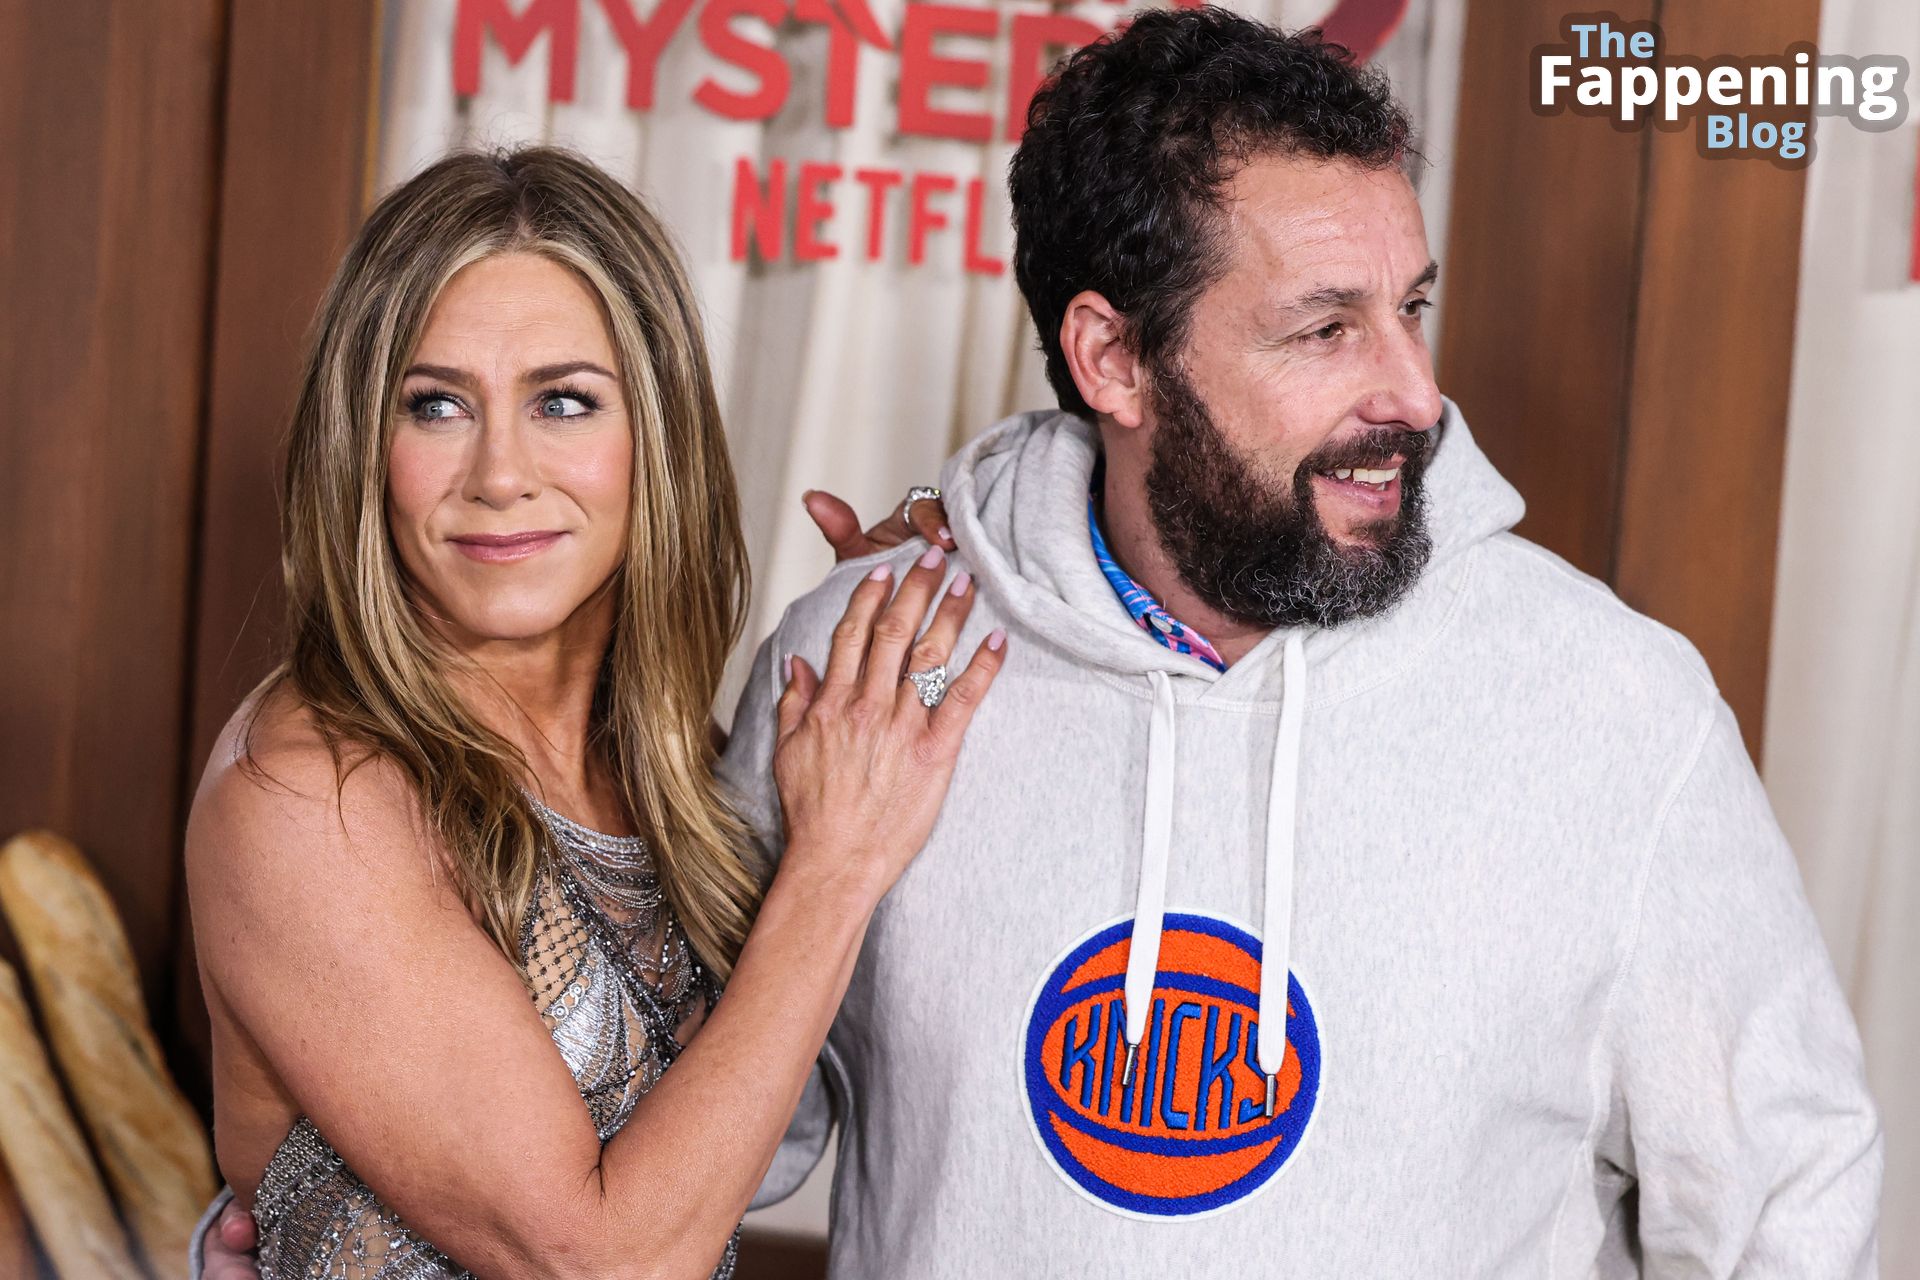 Jennifer Aniston Displays Her Sexy Legs at the Los Angeles Premiere of Netflix’s “Murder Mystery 2” (150 New Photos)